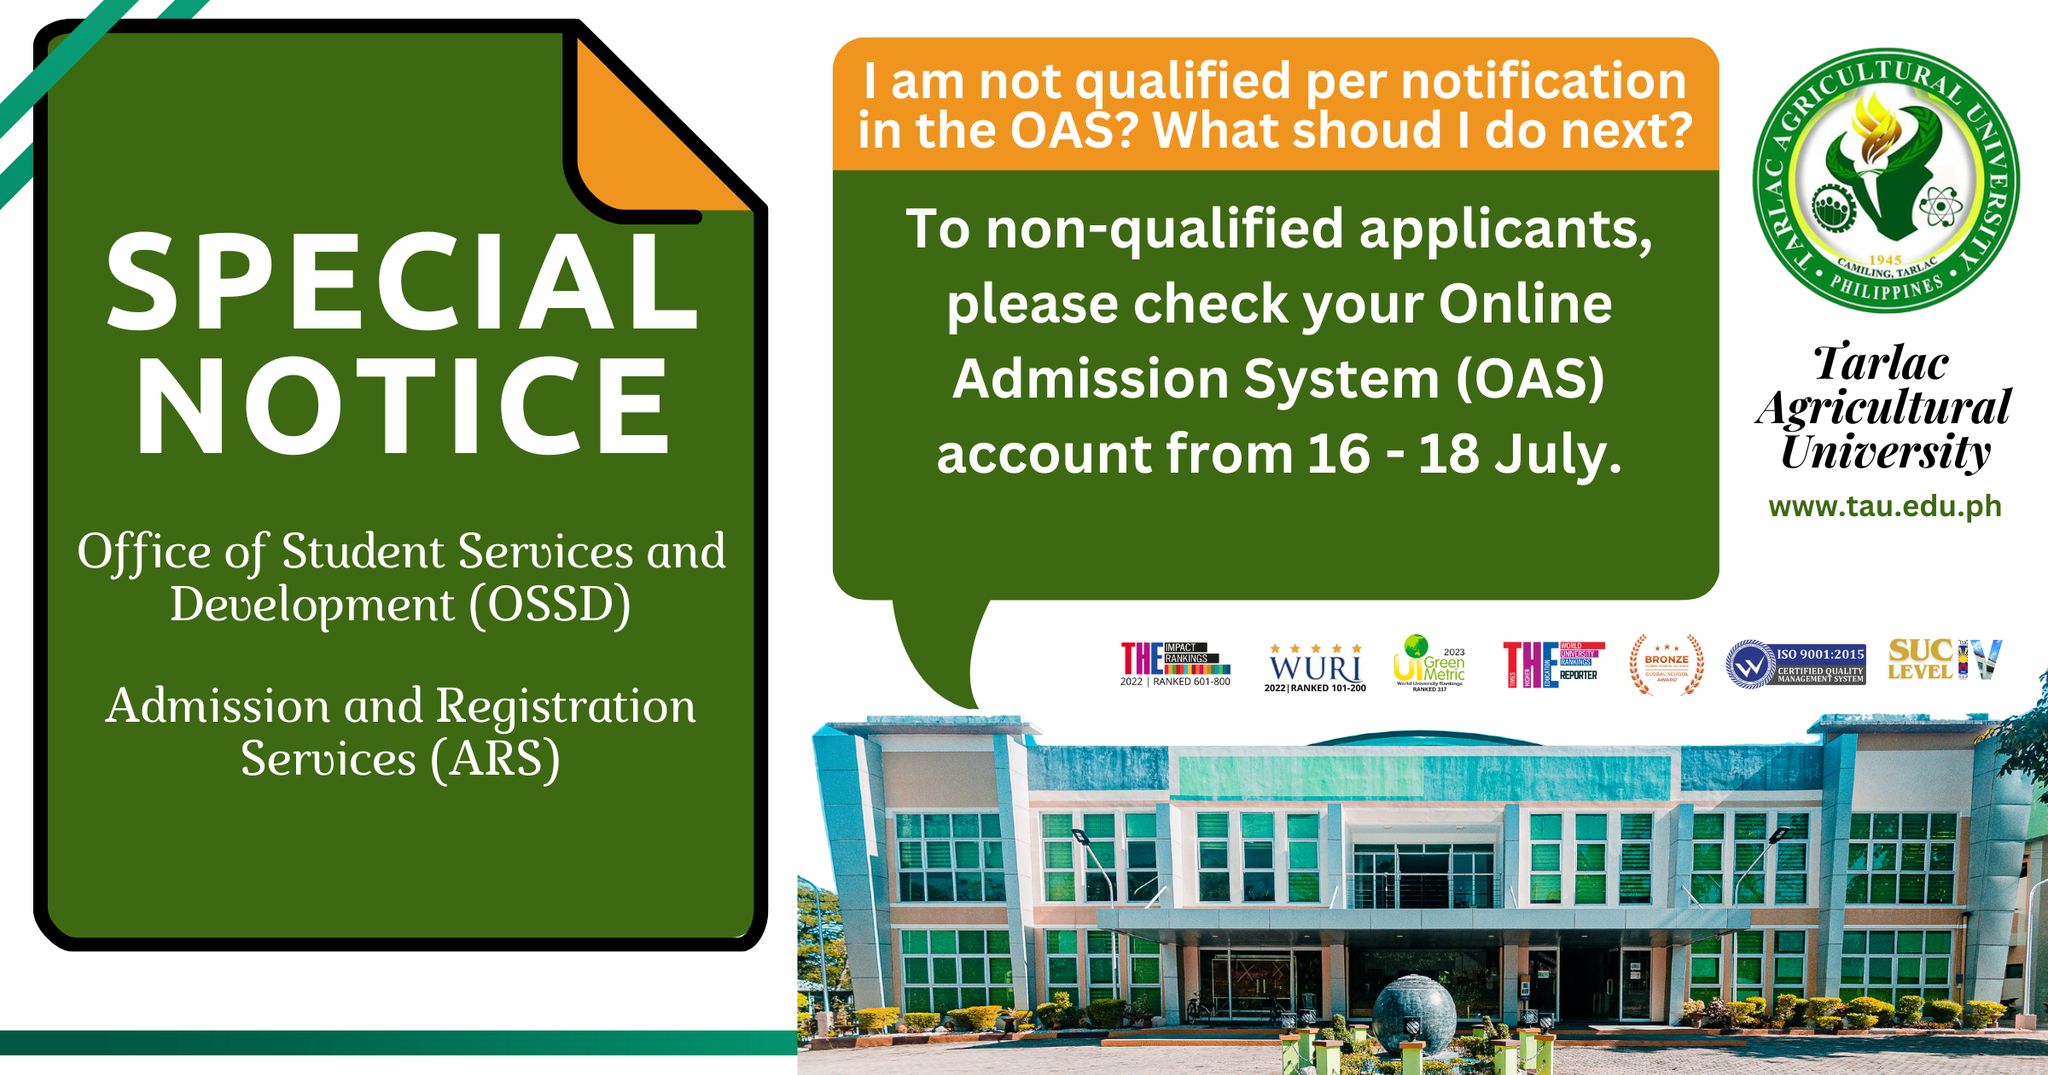 𝐔𝐍𝐈𝐕𝐄𝐑𝐒𝐈𝐓𝐘 𝐁𝐔𝐋𝐋𝐄𝐓𝐈𝐍 | Office of Student Services and Development (OSSD) and Admission and Registration Services (ARS) is now implementing its Affirmative Action Plan (AAP) for first-year applicants and re-evaluating the admission results